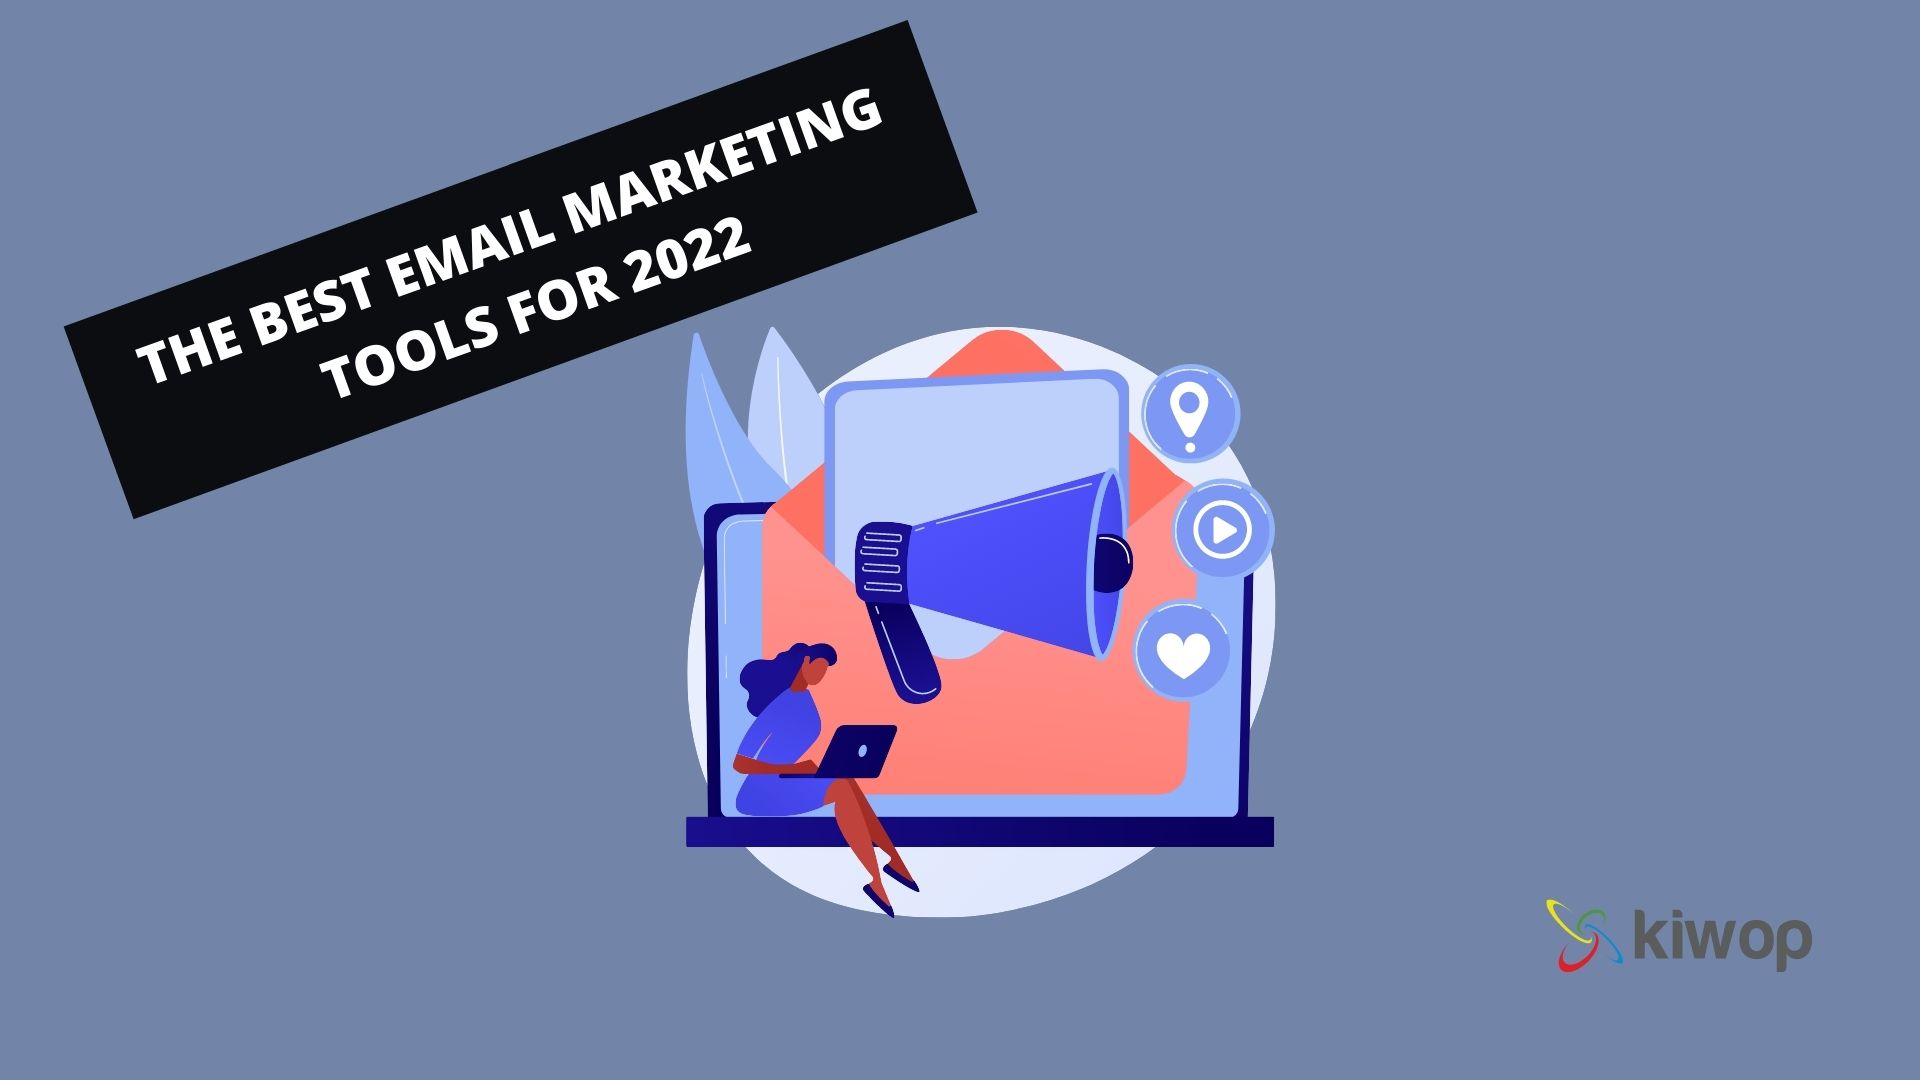 The best email marketing trends for 2022